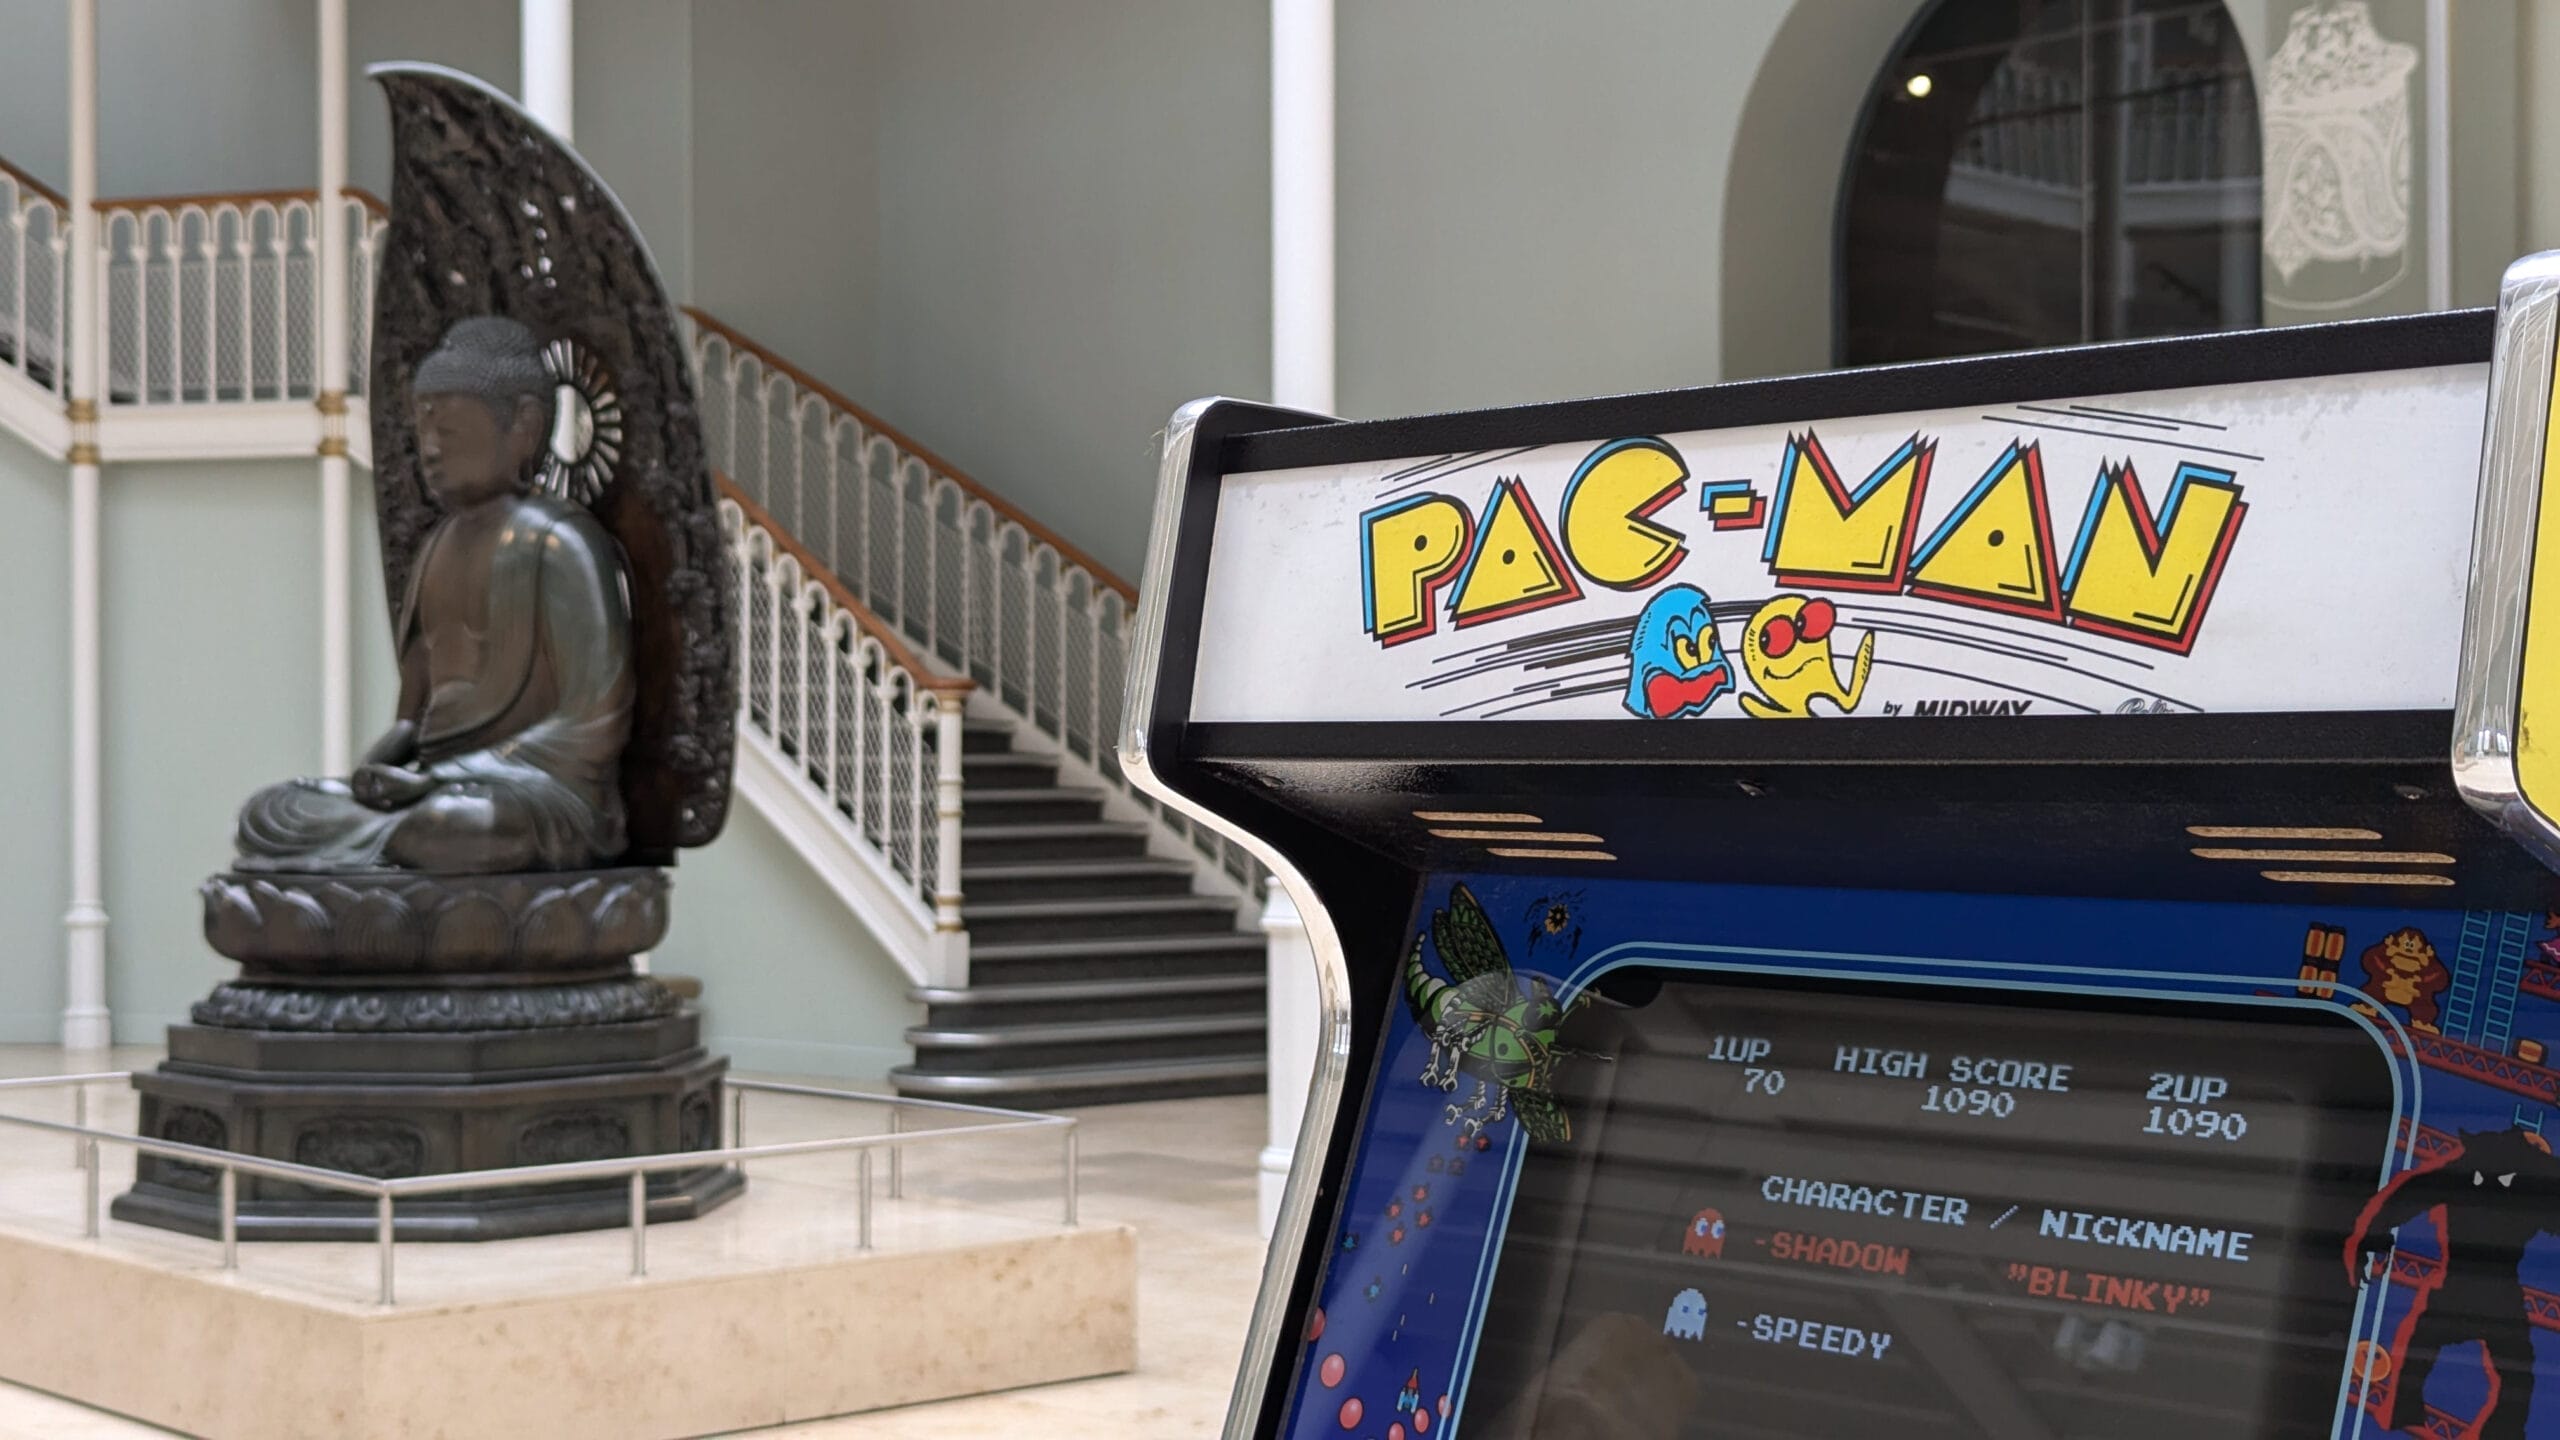 Pac-man in the Museum 